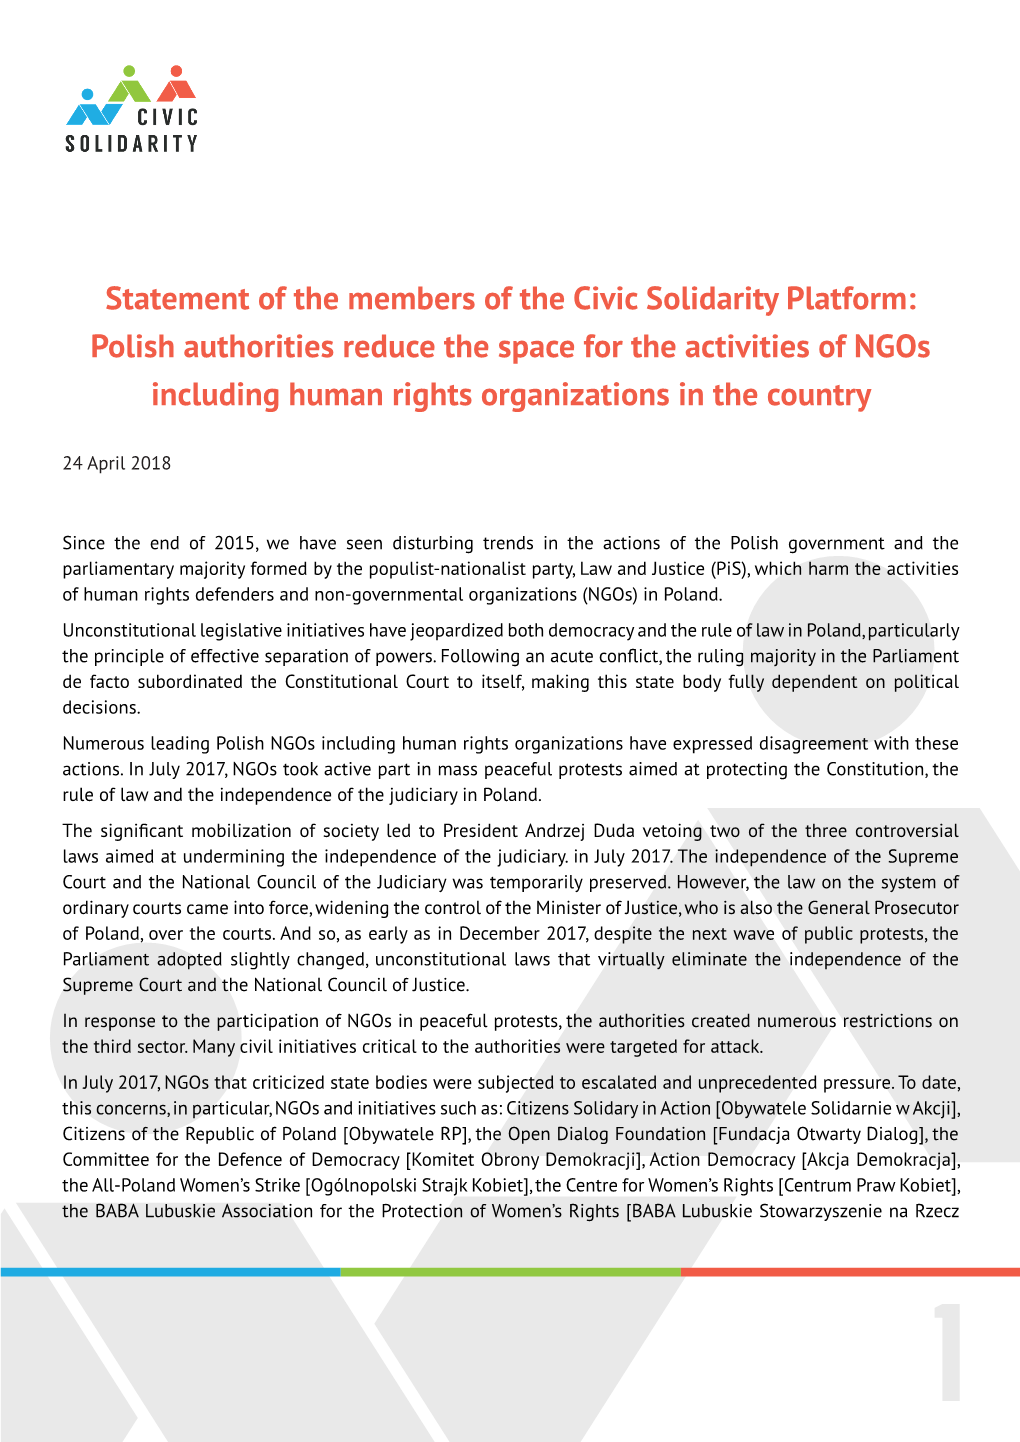 Statement of the Members of the Civic Solidarity Platform: Polish